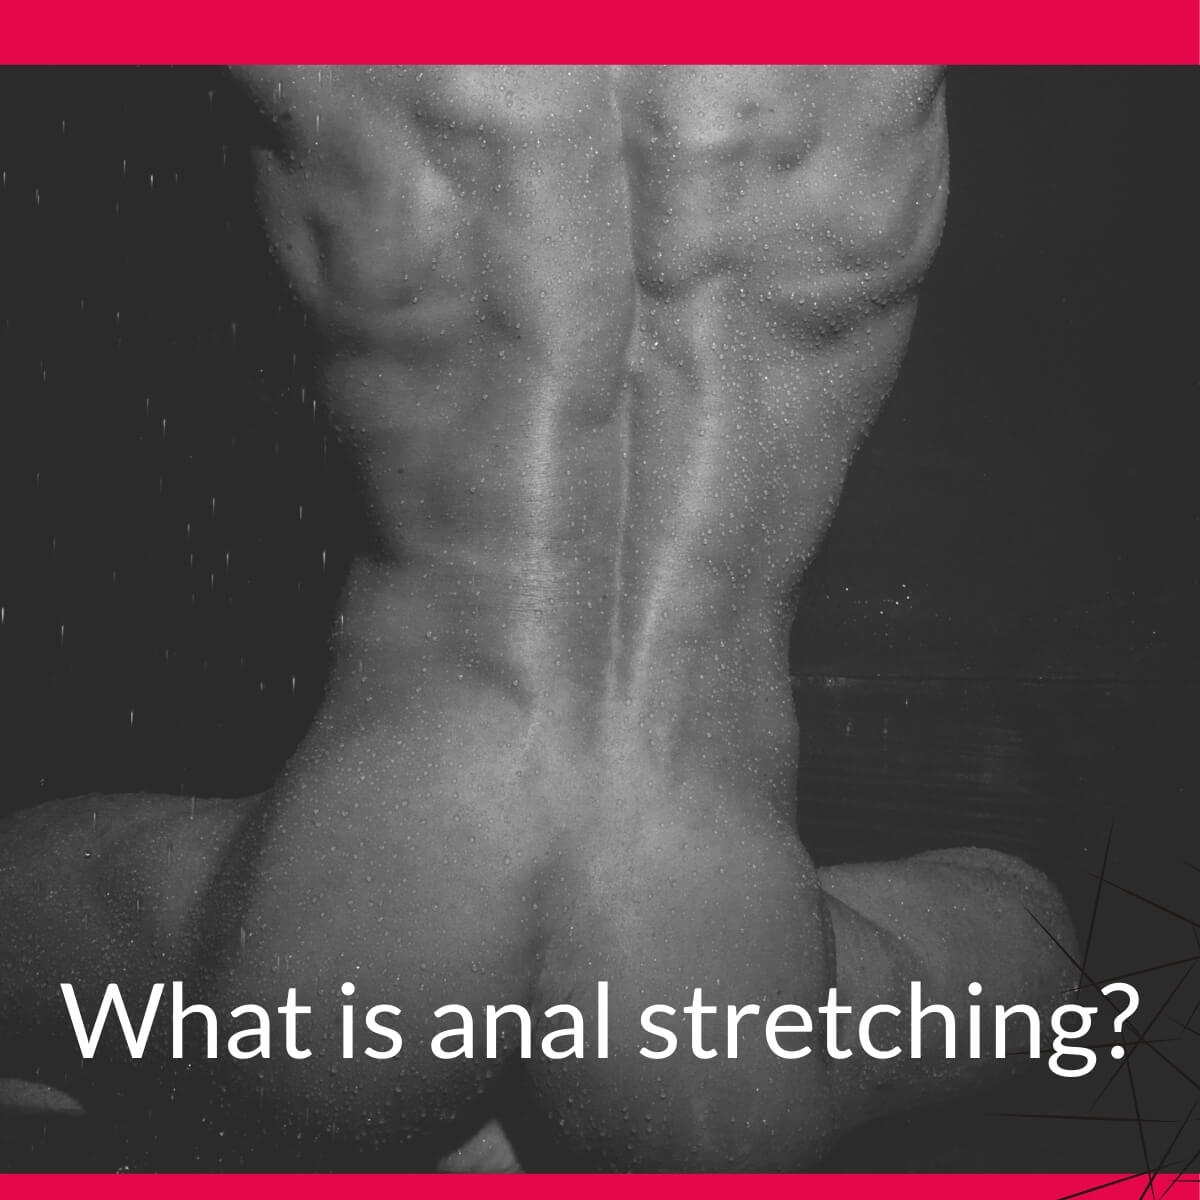 what is anal stretching?